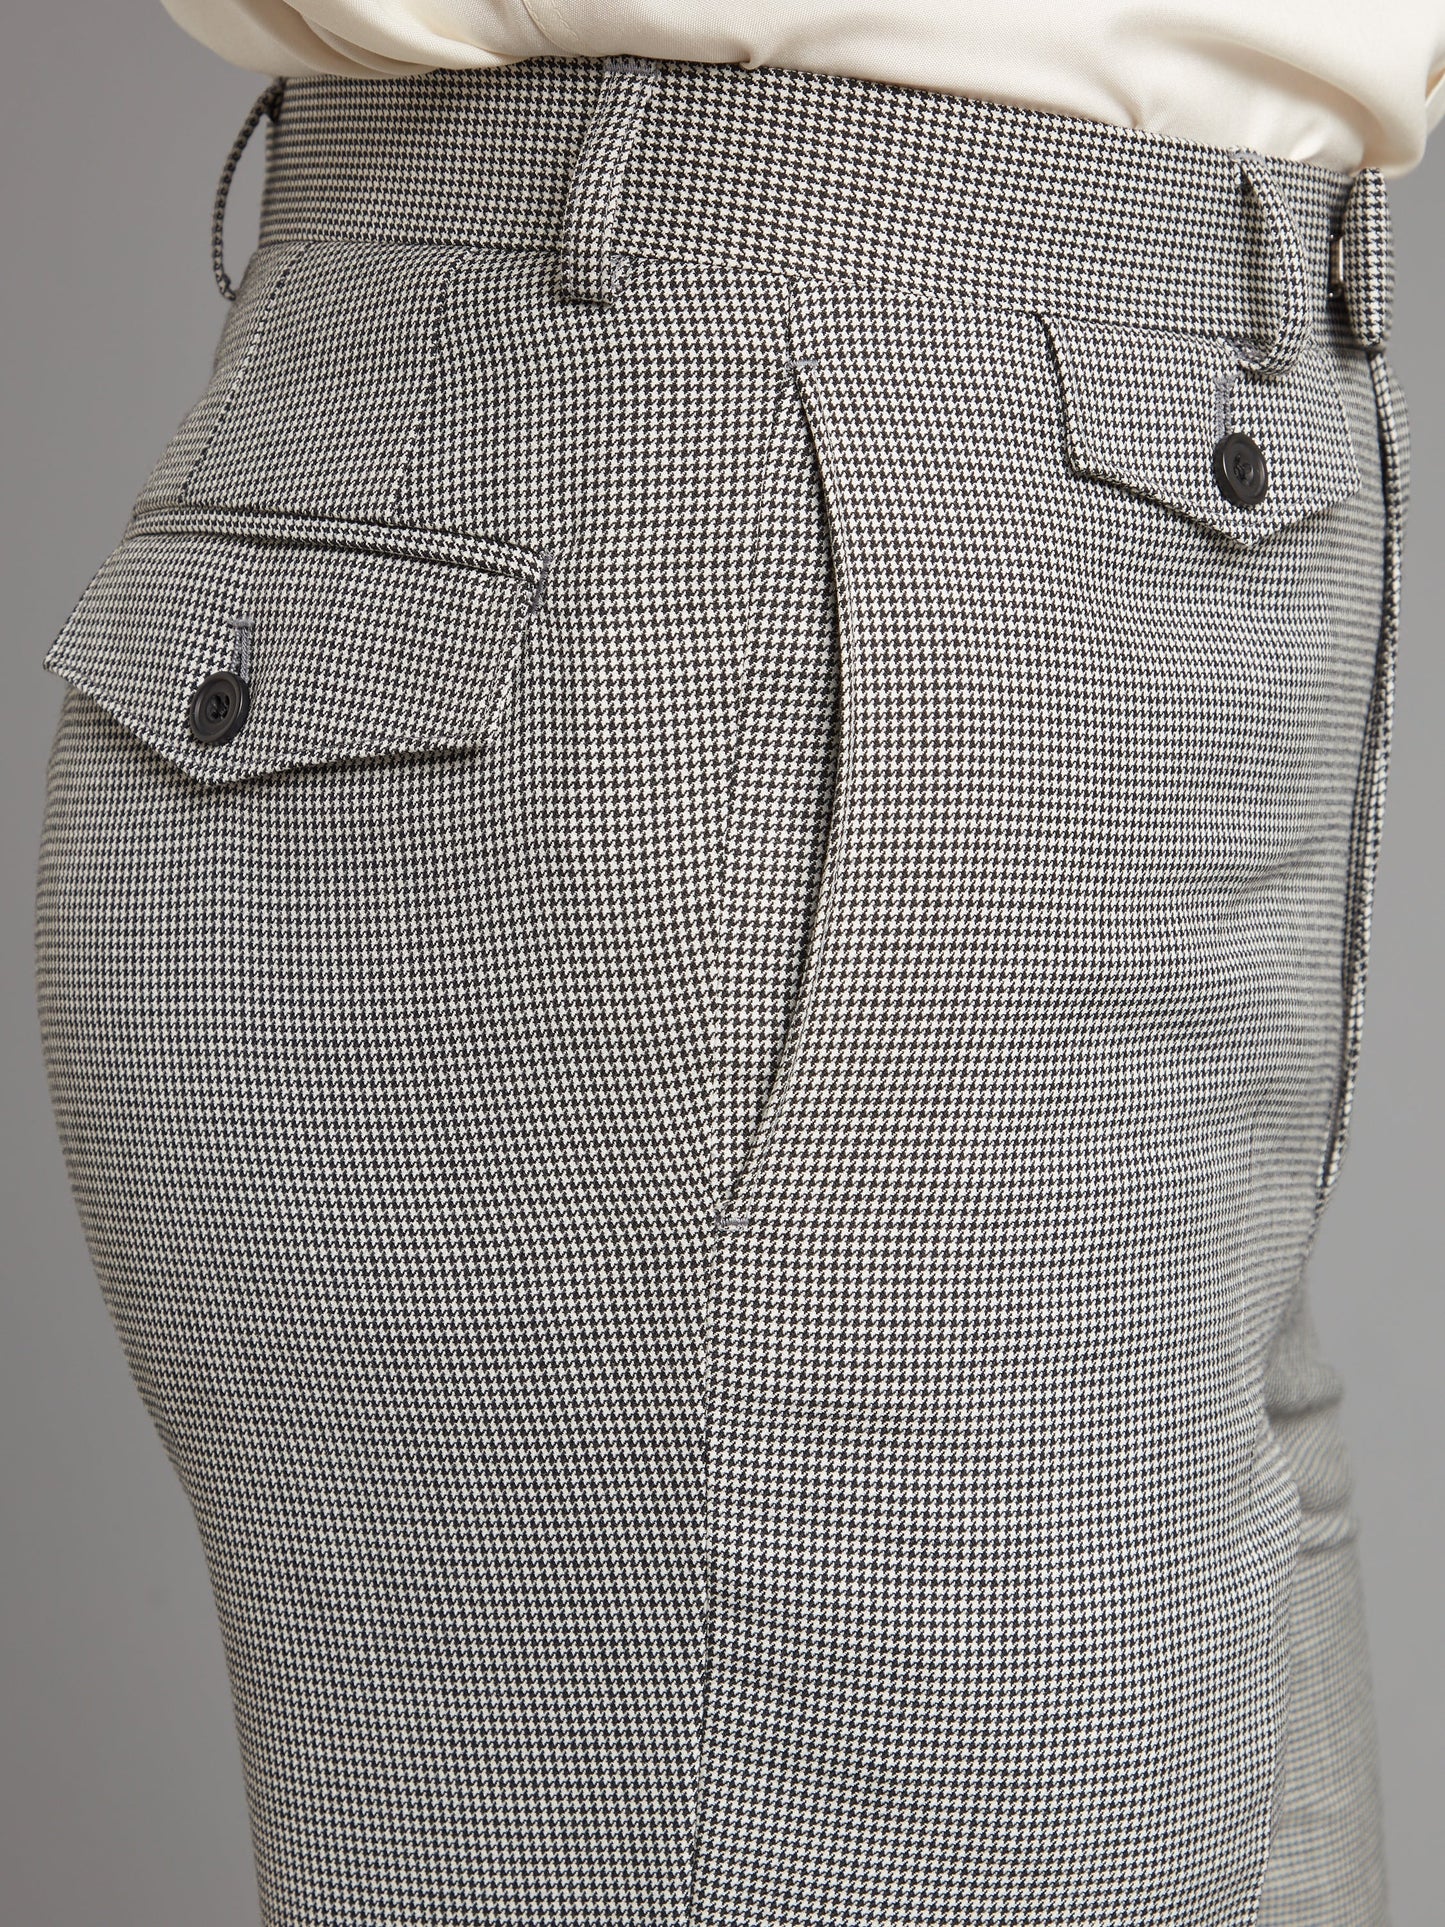 Flat Front Trousers with Coin Pocket - Black & White Houndstooth